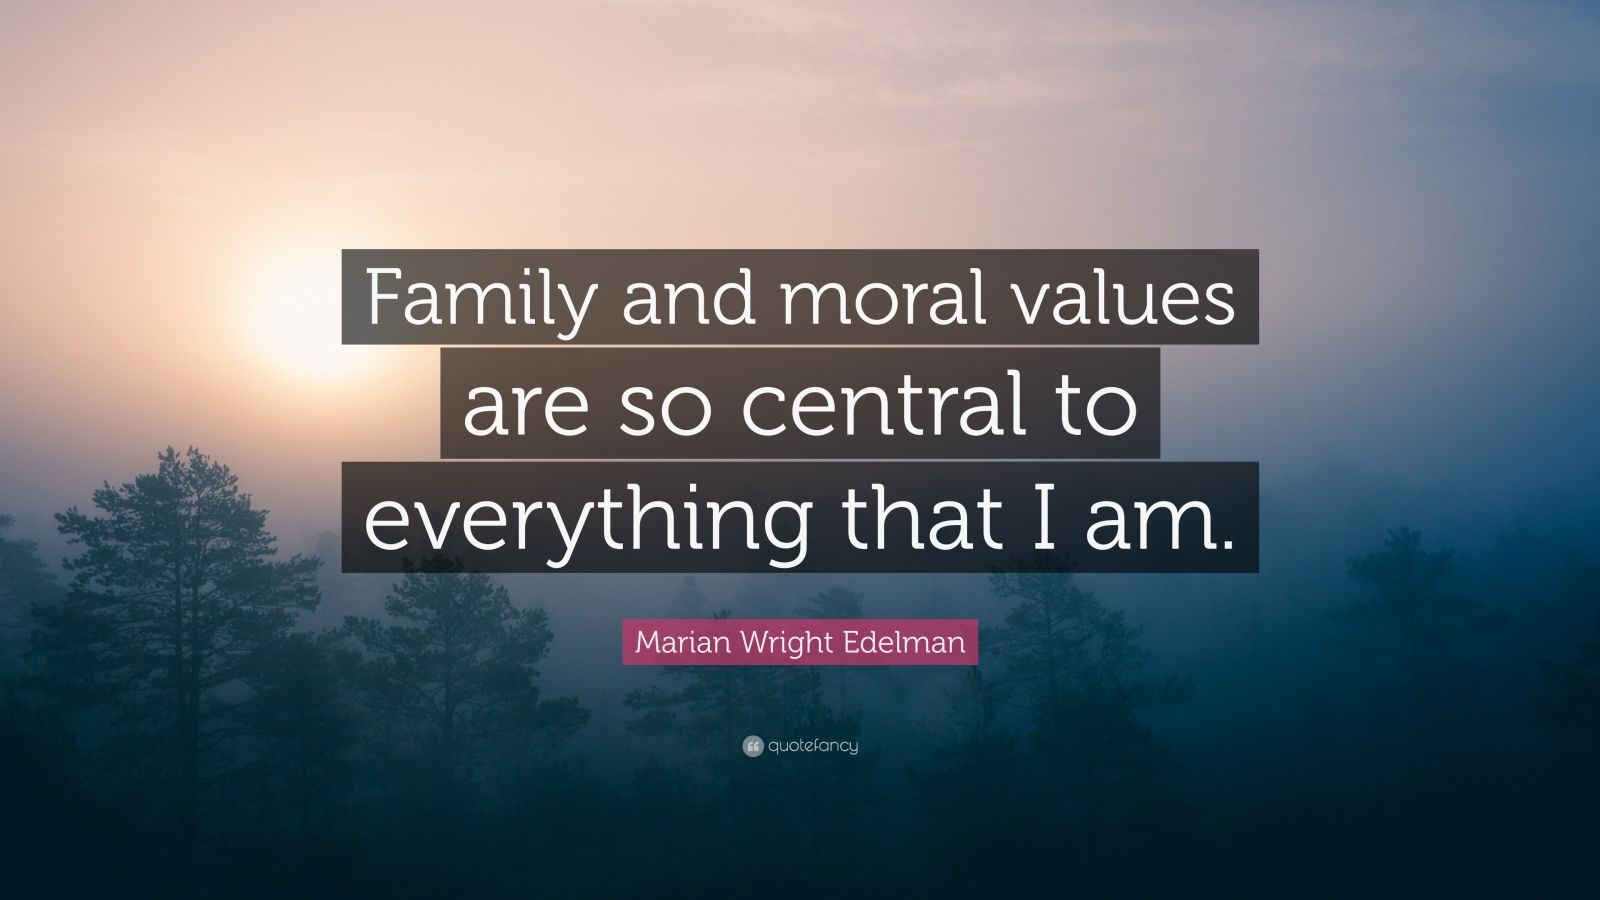 Marian Wright Edelman Quote: "Family and moral values are so central to ...